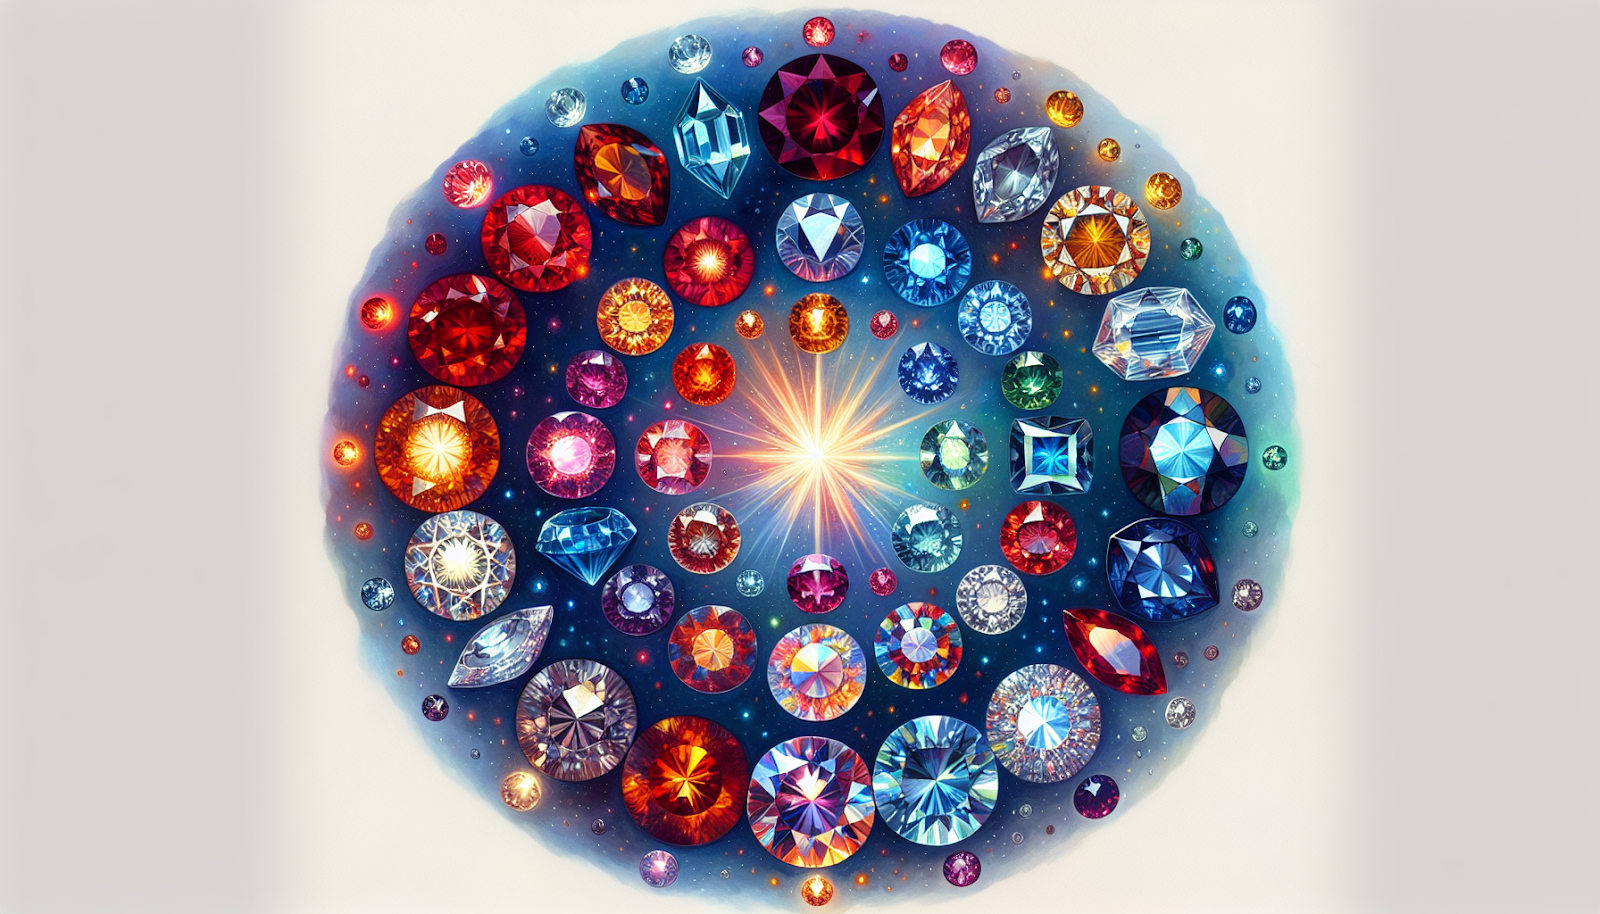 Various colorful birthstones arranged in a circular pattern